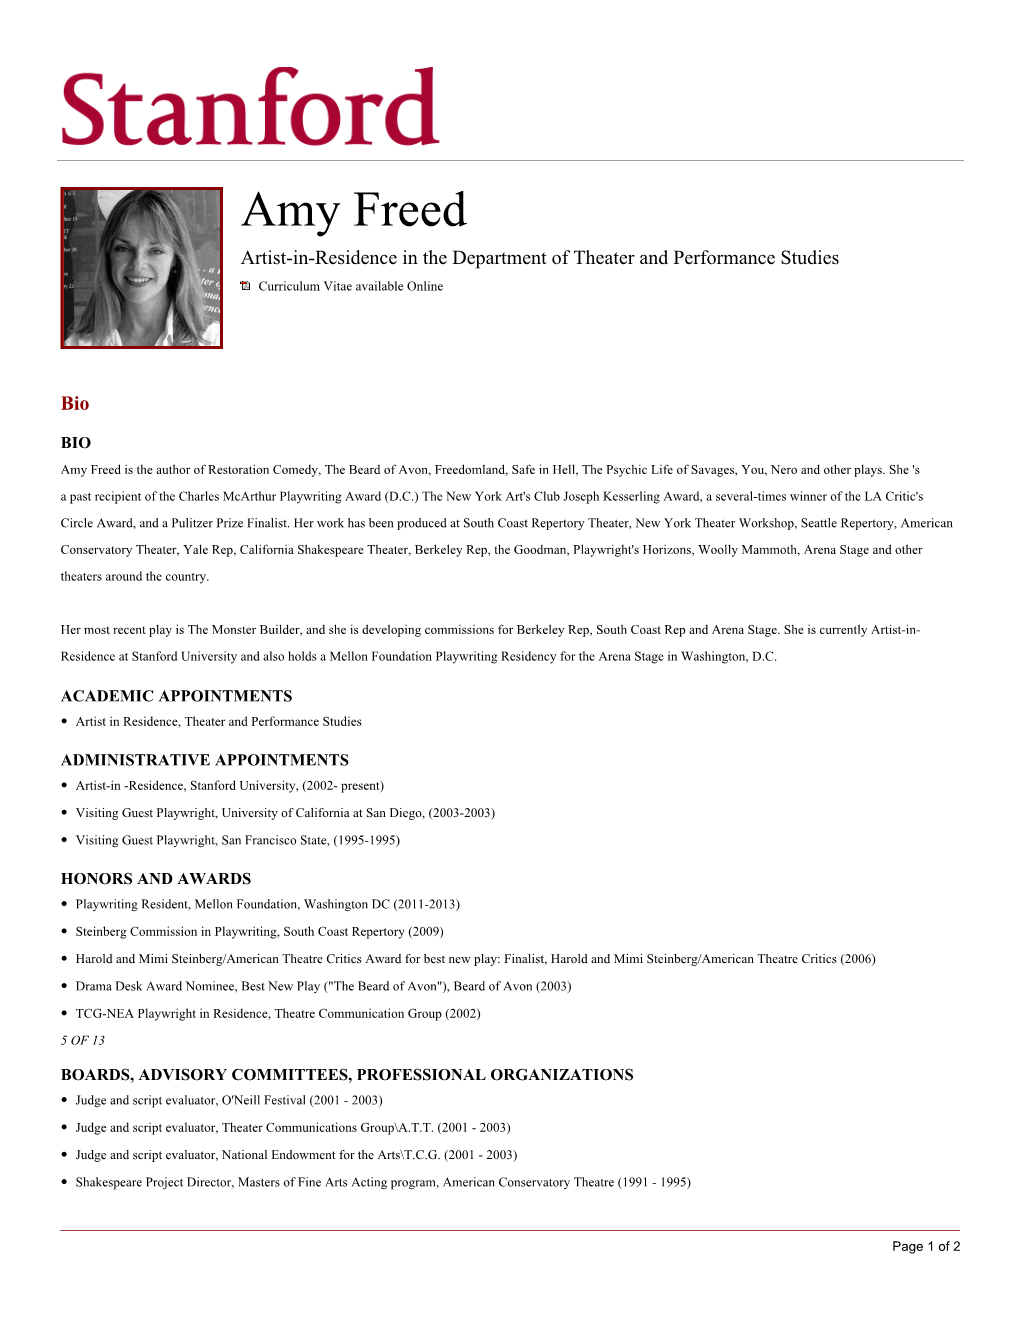 Amy Freed Artist-In-Residence in the Department of Theater and Performance Studies Curriculum Vitae Available Online